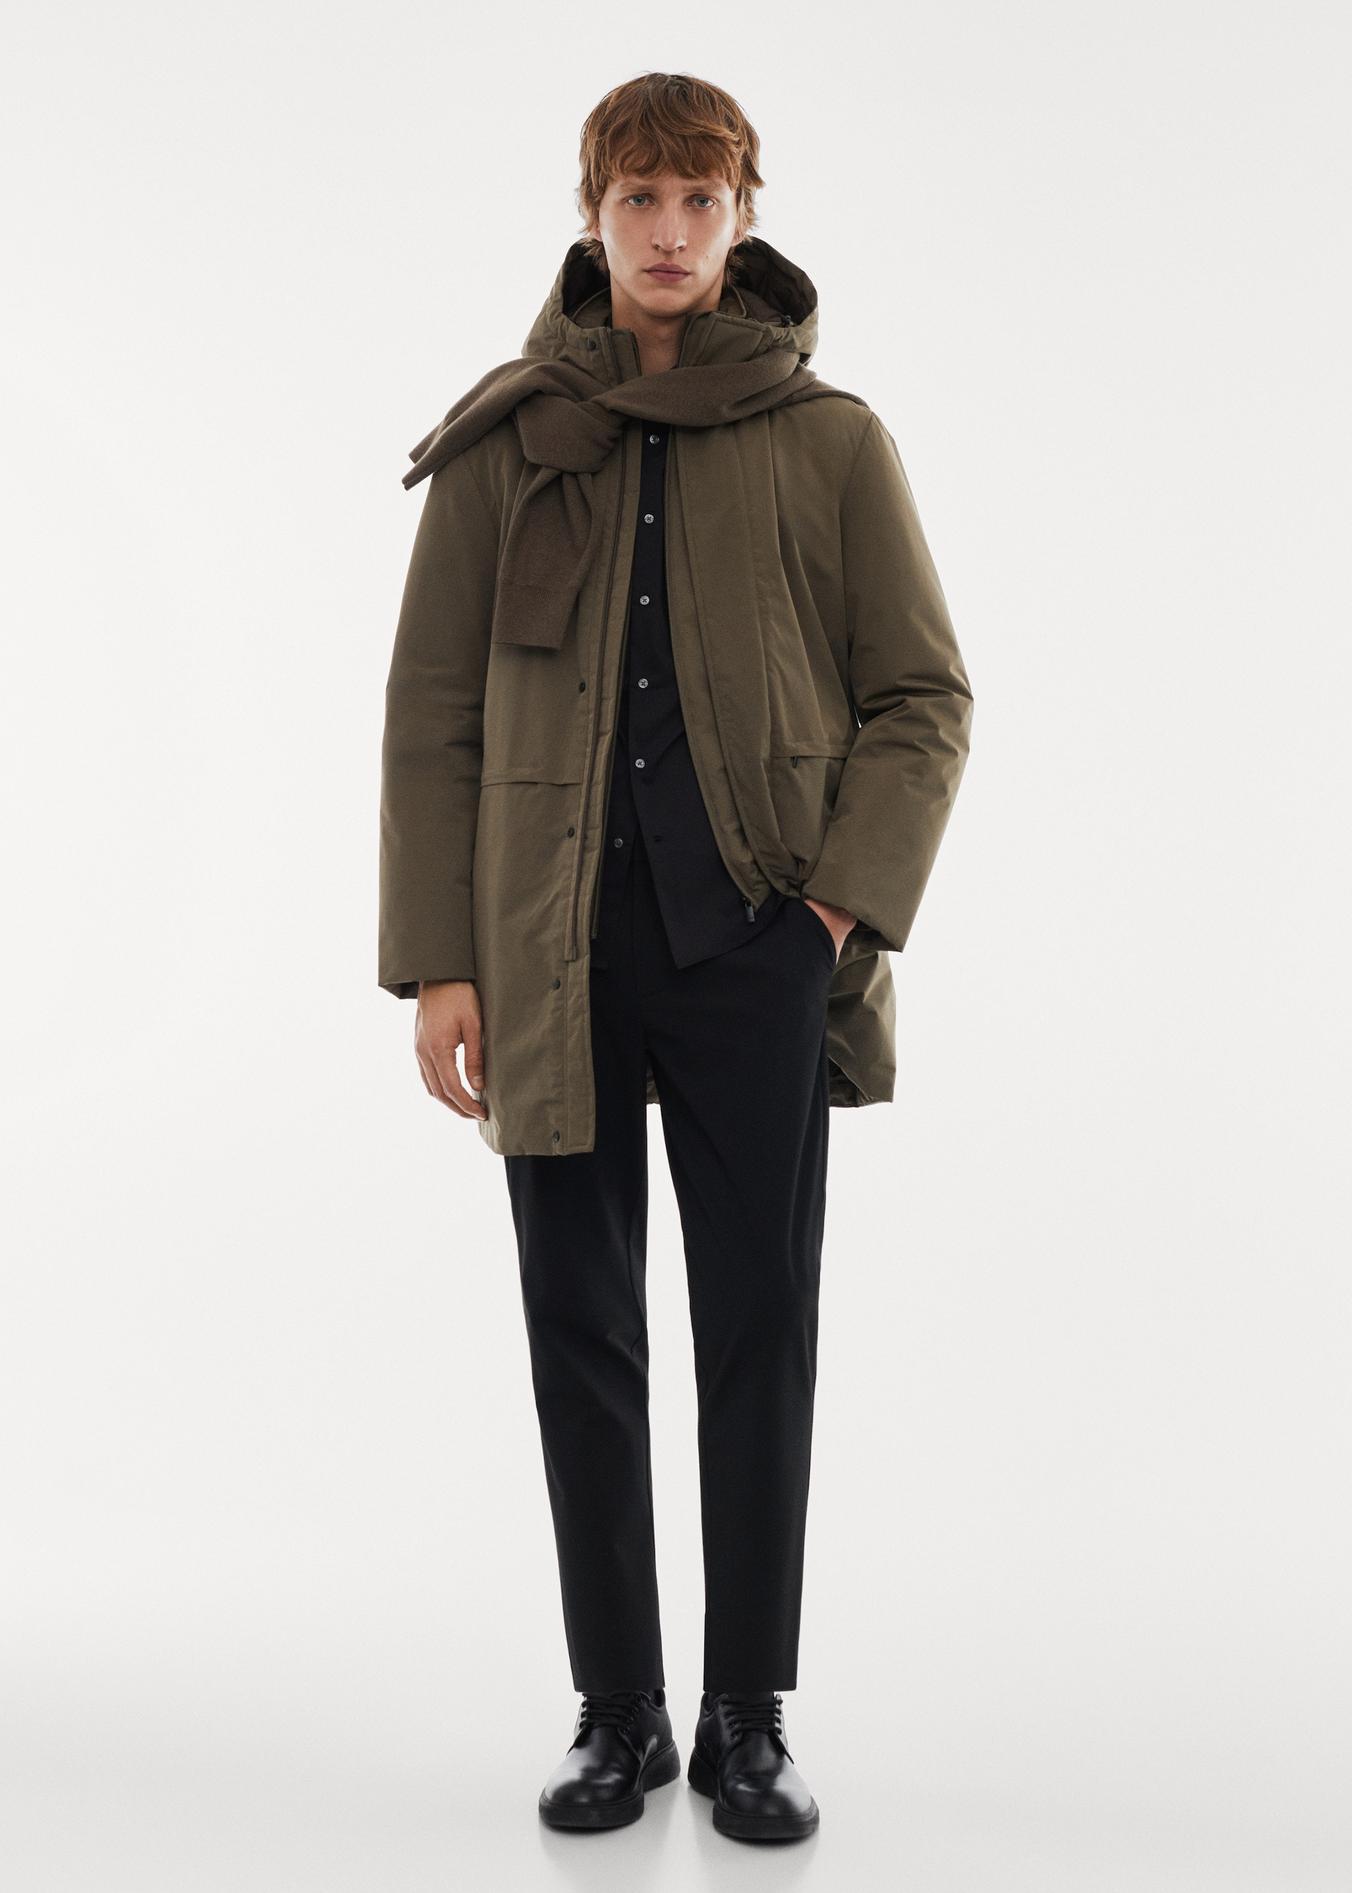 SOFEELATE® padded parka with hood offers at S$ 179.9 in Mango